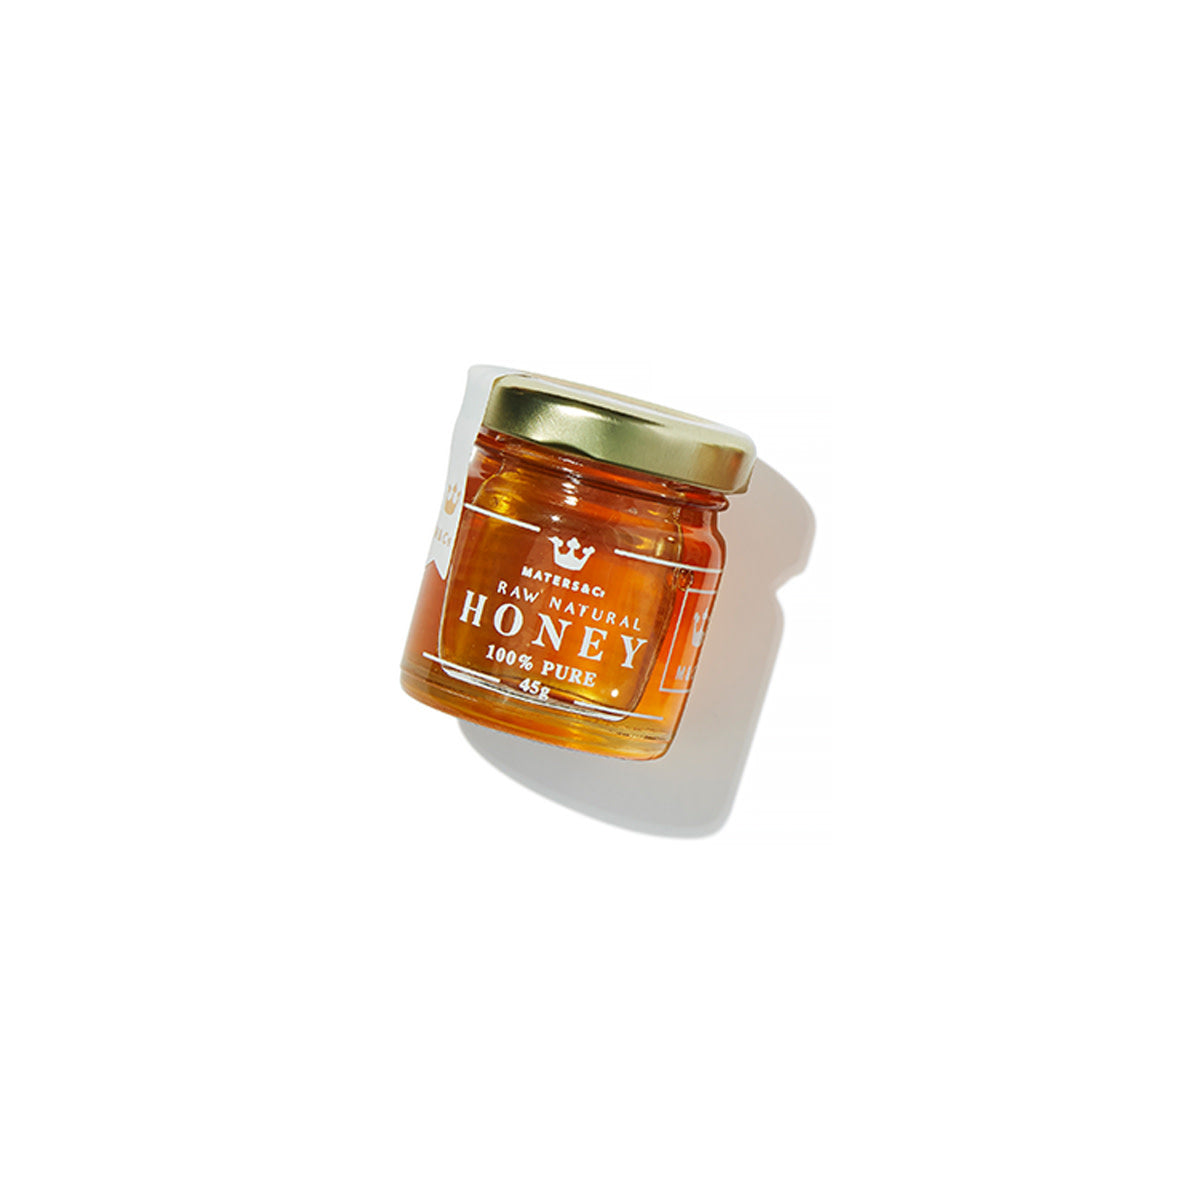 Maters & Co Honey